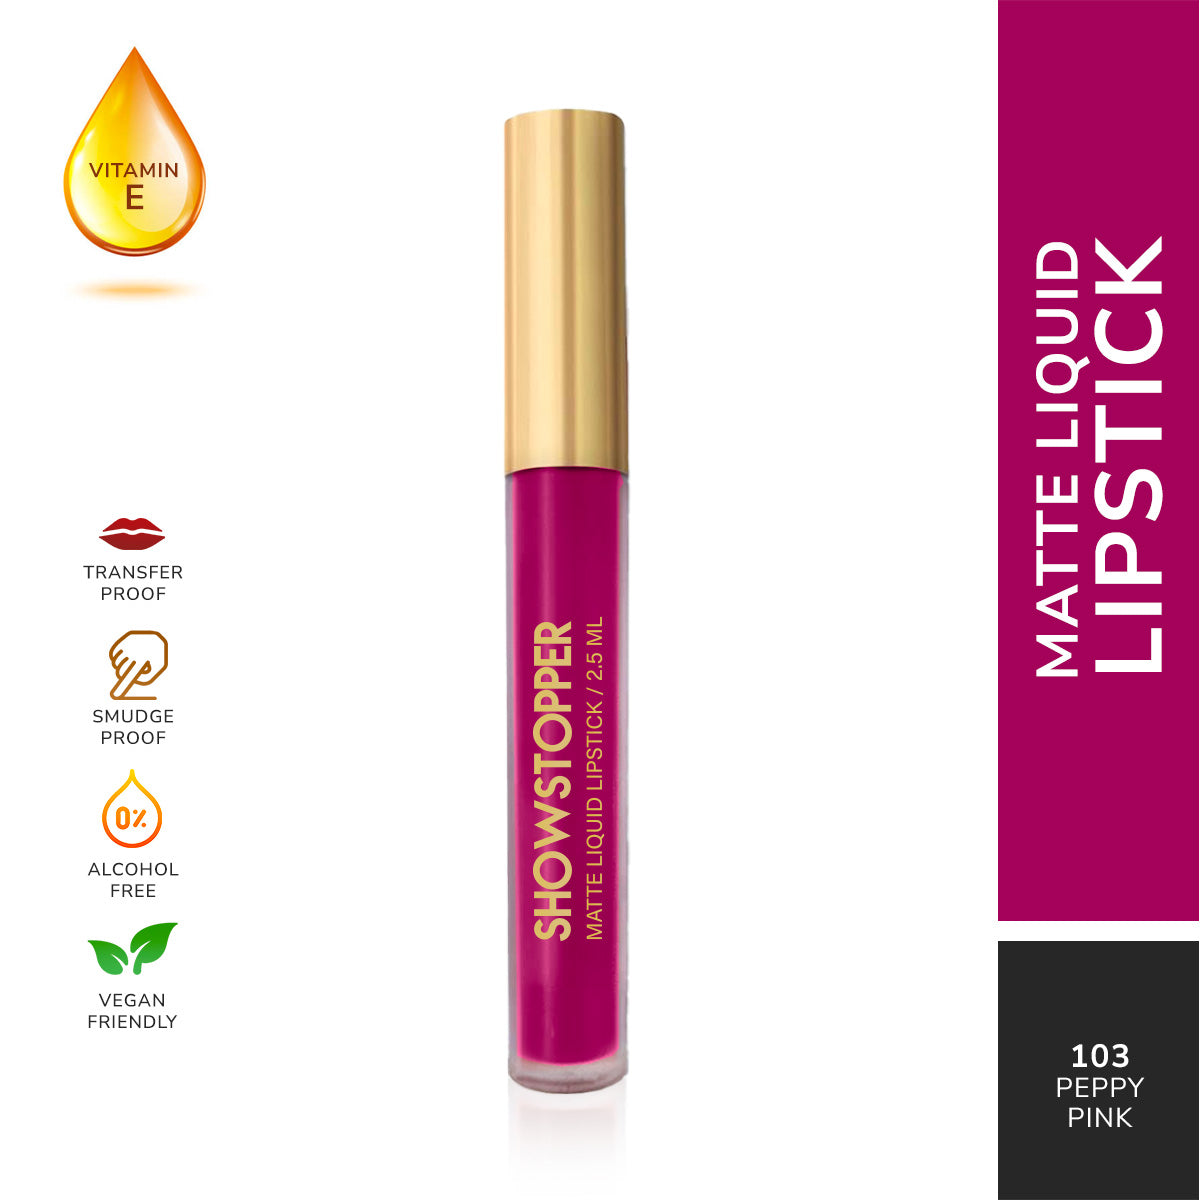 GET 5 SHOWSTOPPER LIQUID LIPSTICK PARTY WEAR SHADES